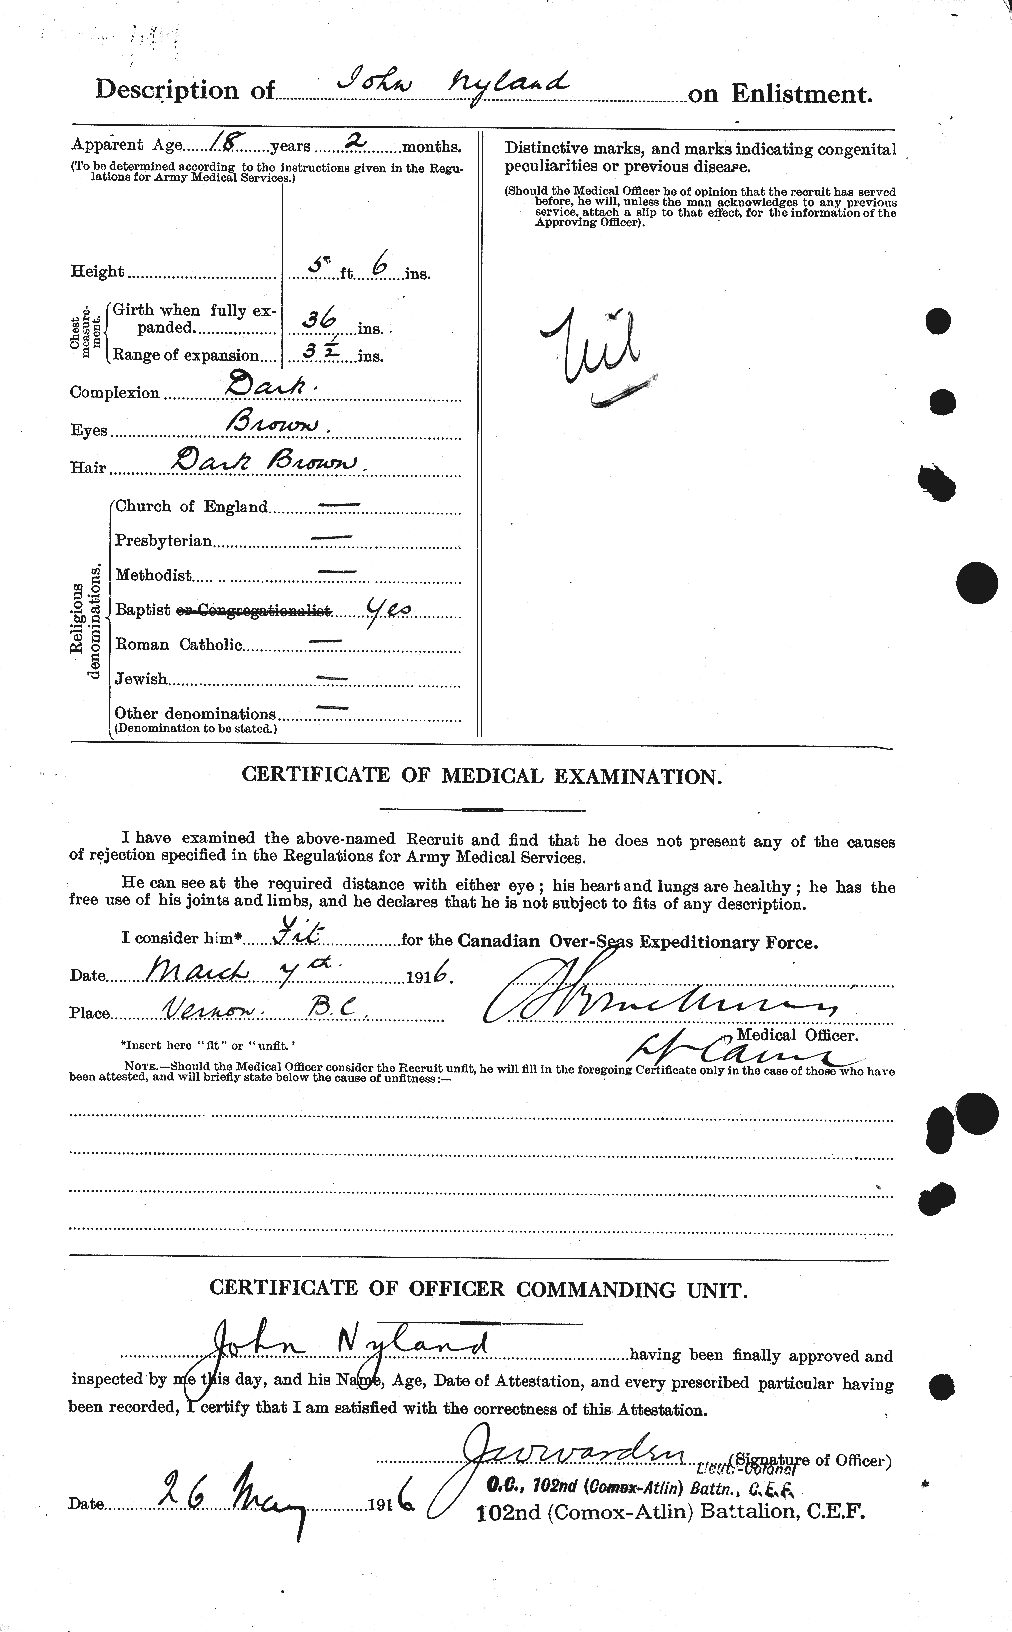 Personnel Records of the First World War - CEF 555446b